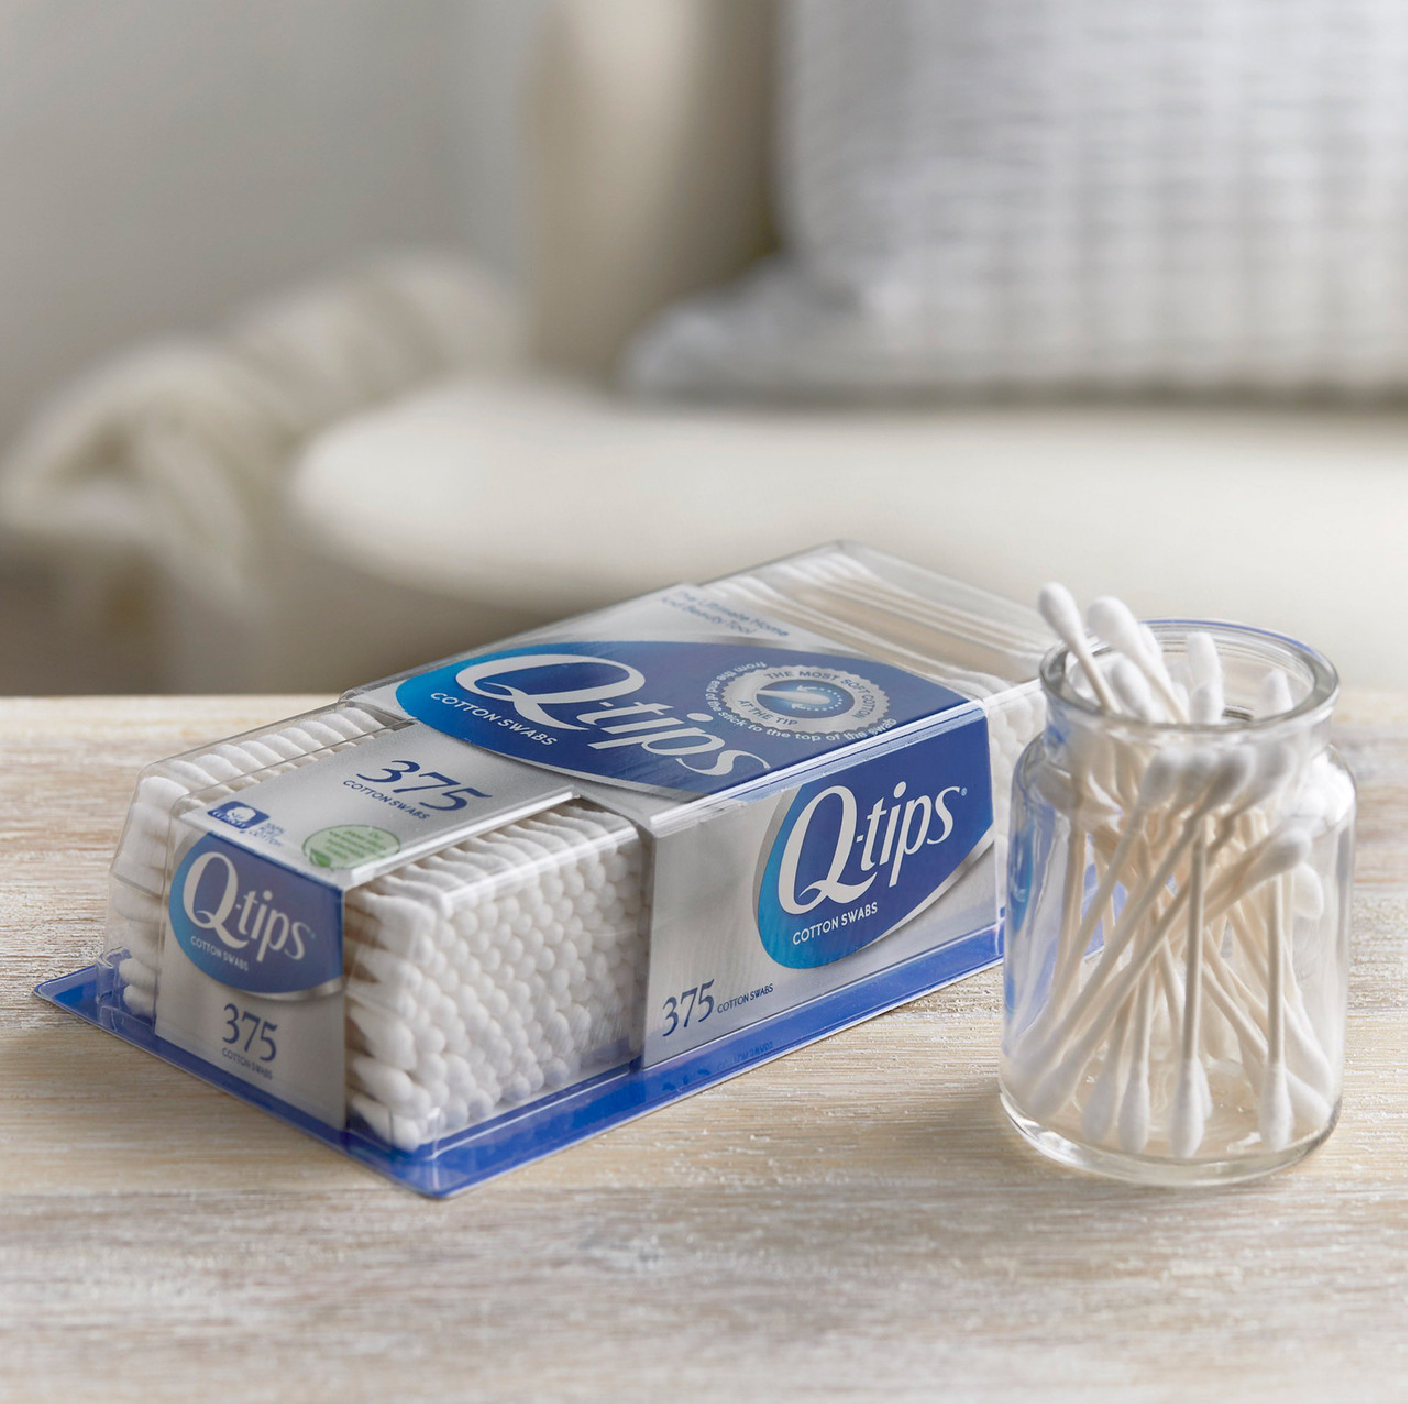 Q-Tips Cotton Swabs 625 Count - Carlo Pacific